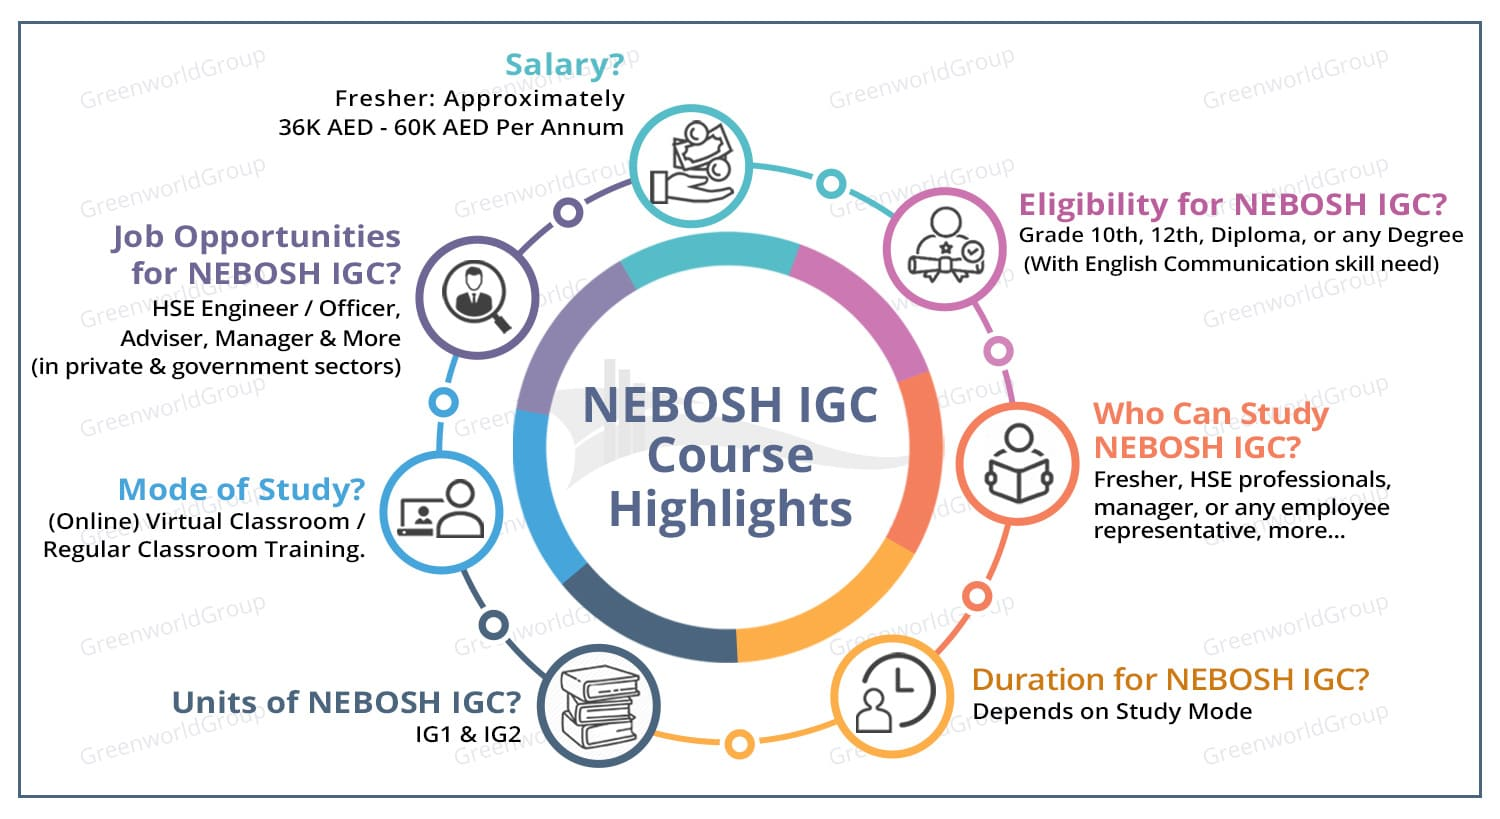 Highlights of NEBOSH IGC Infographics by Green World Group